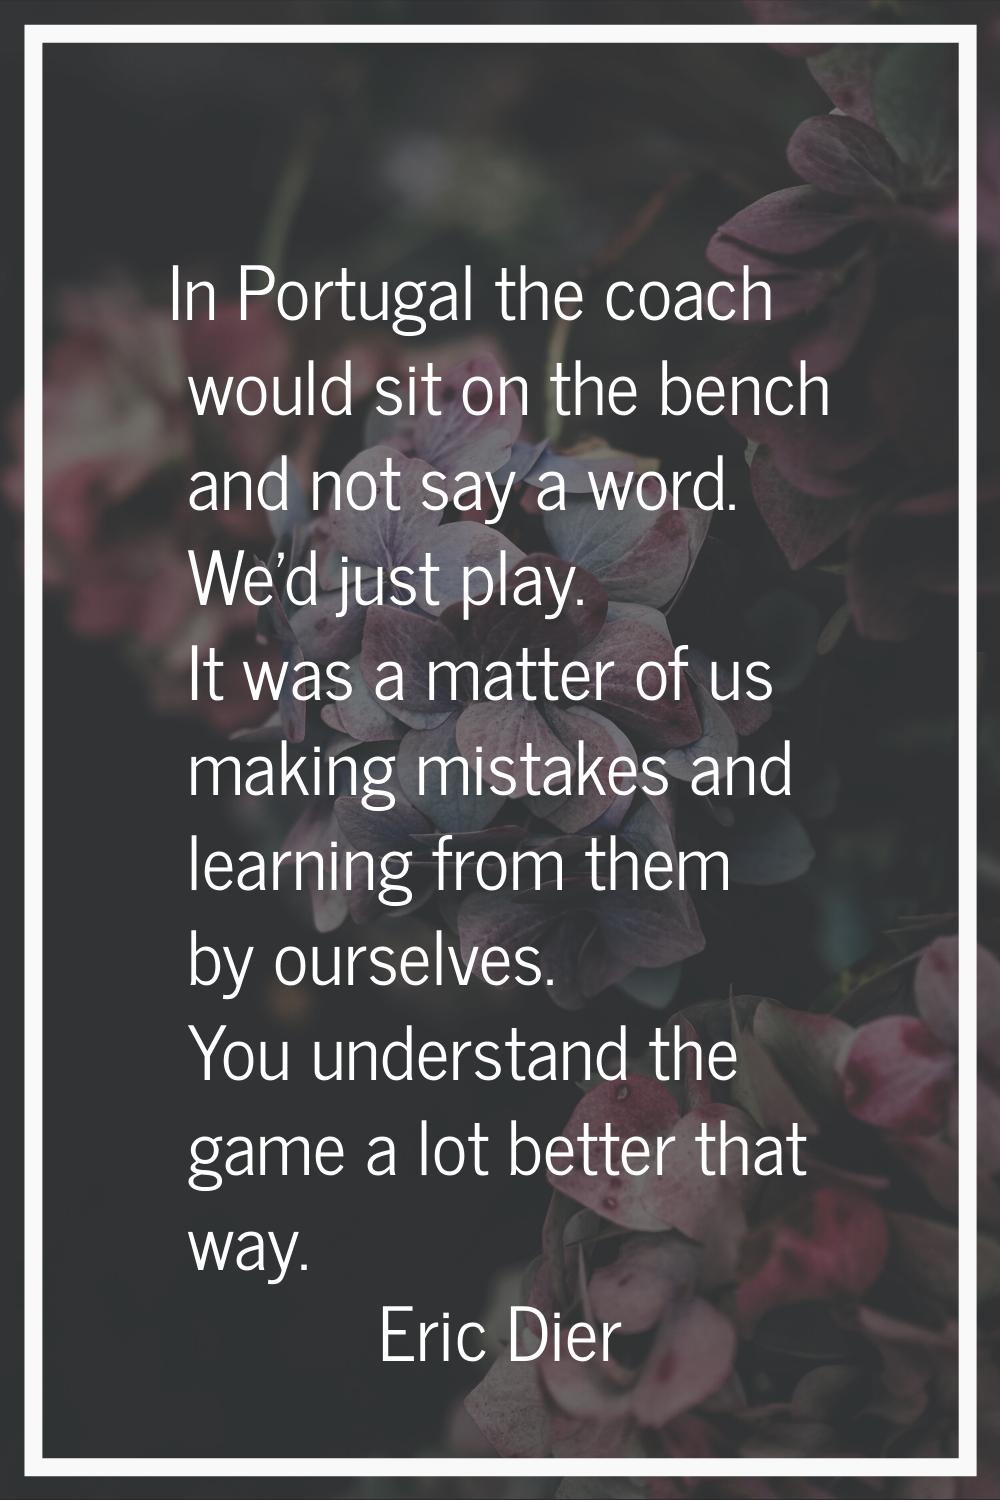 In Portugal the coach would sit on the bench and not say a word. We'd just play. It was a matter of